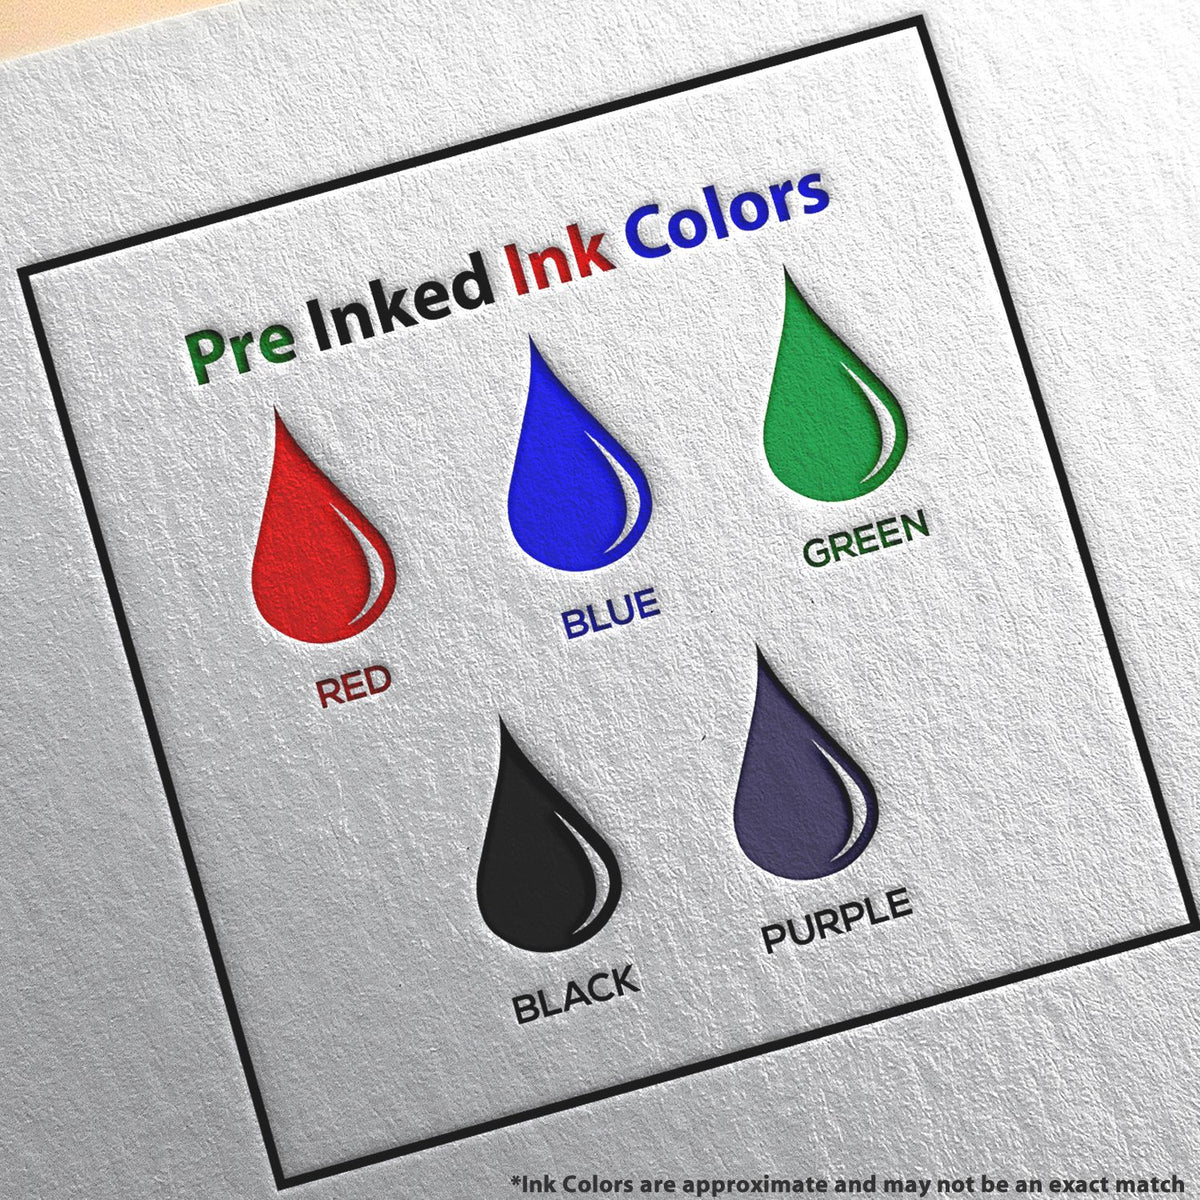 A picture showing the different ink colors or hues available for the Slim Pre-Inked Rectangular Notary Stamp for Missouri product.